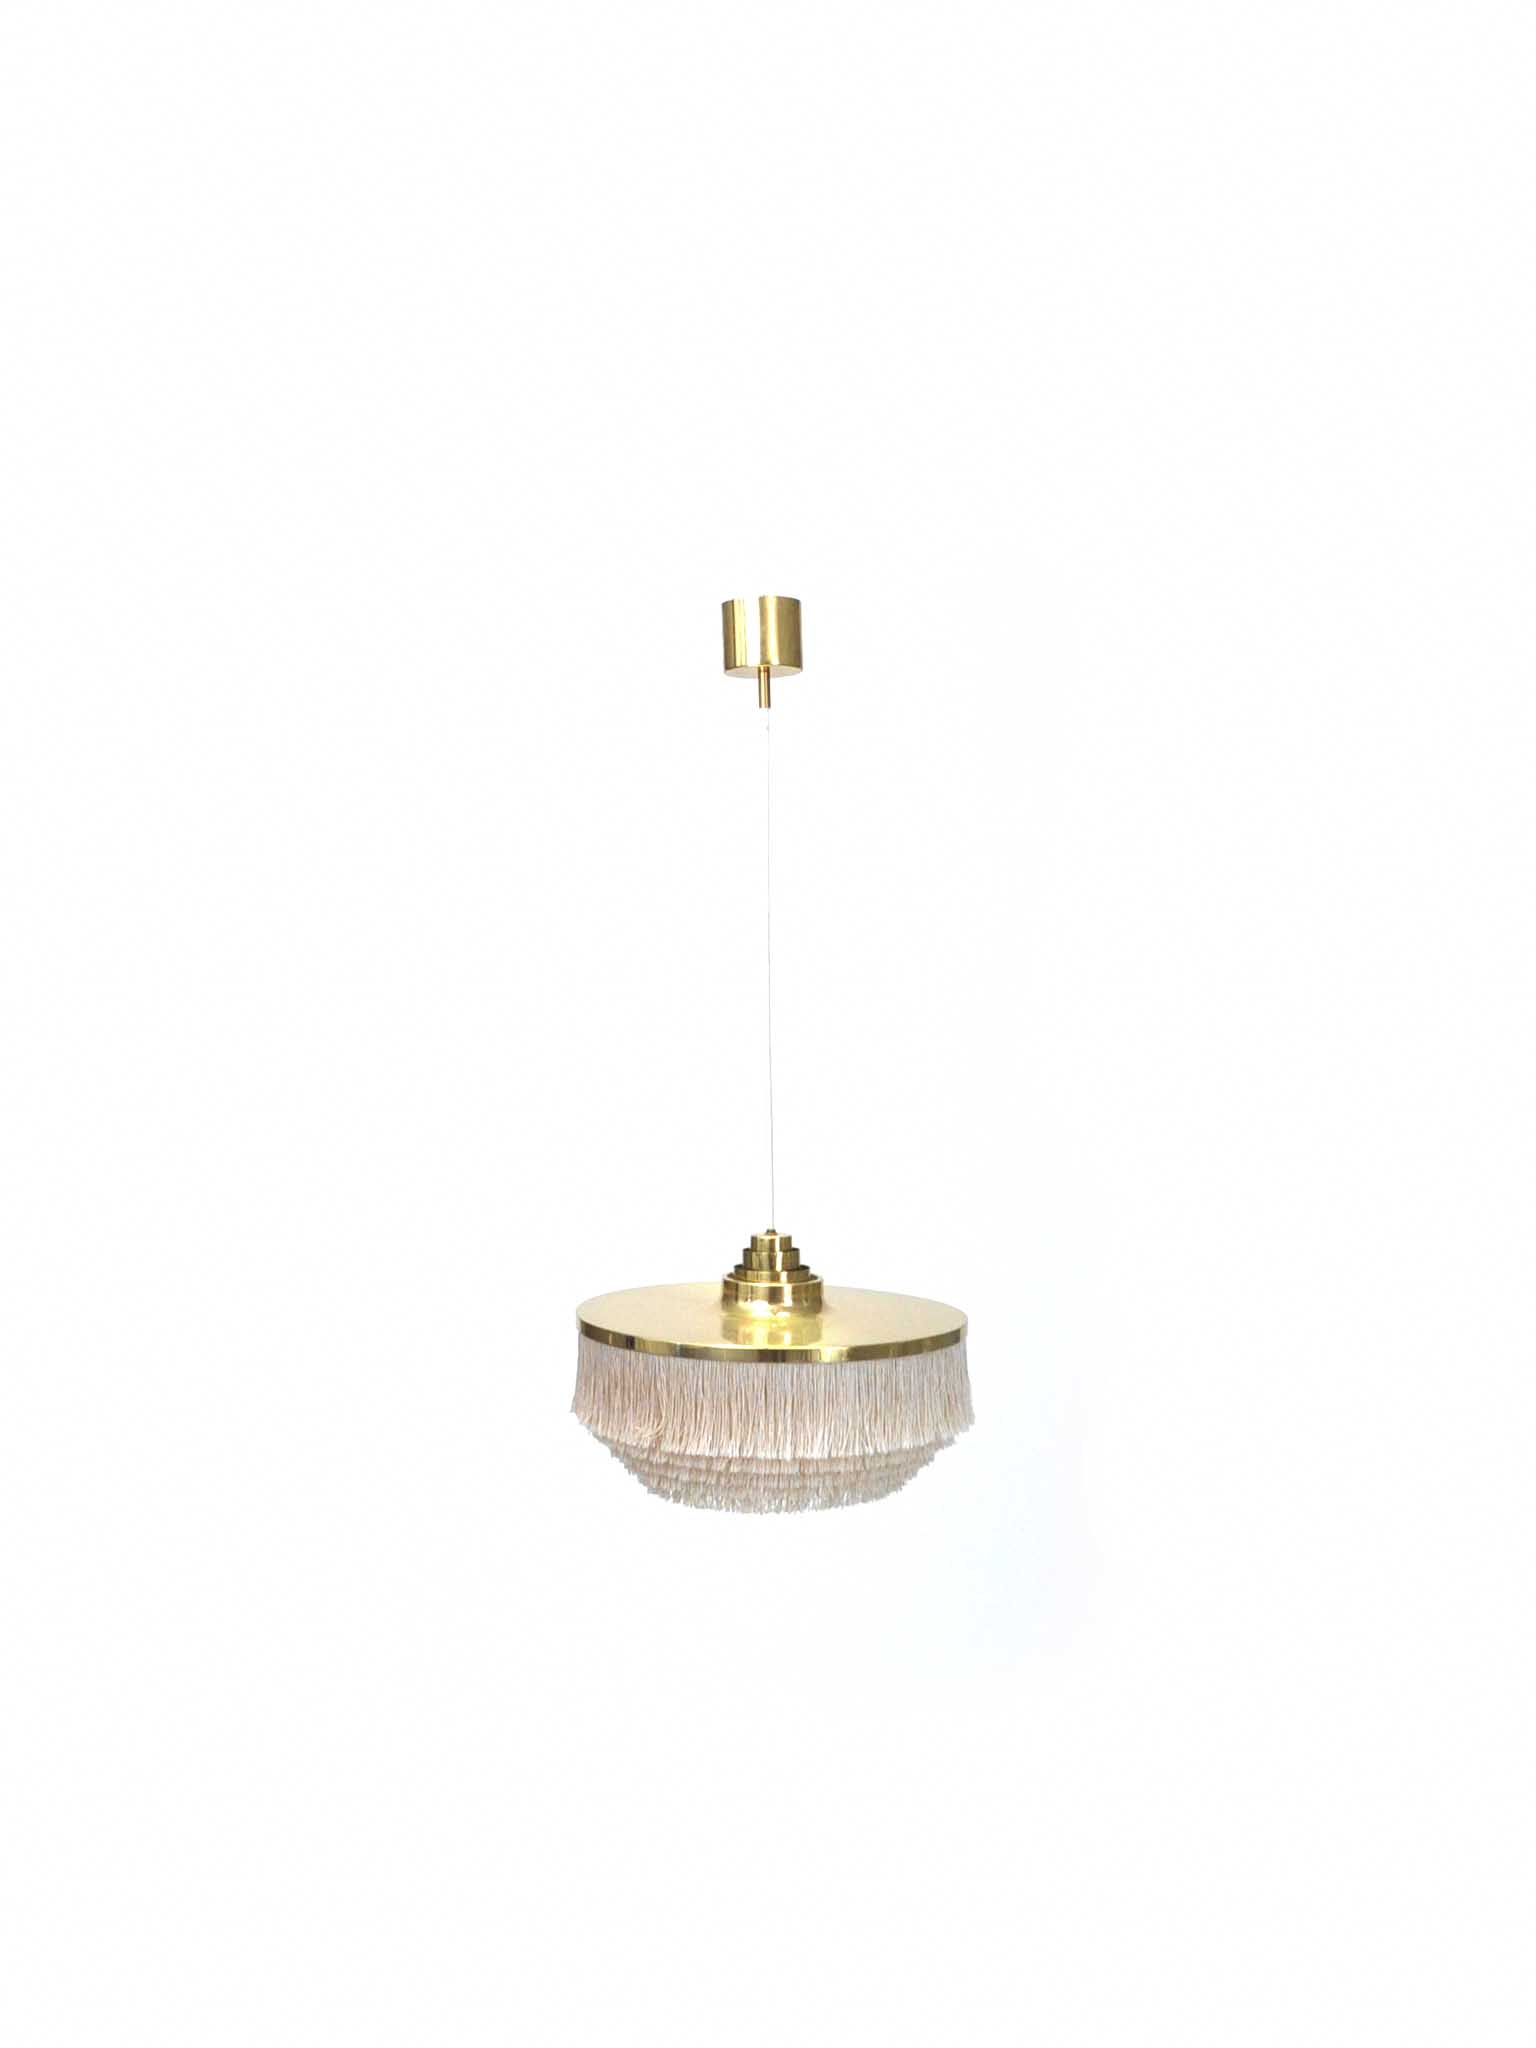 FRINGED CEILING LAMP BY HANS-AGNE JAKOBSSON